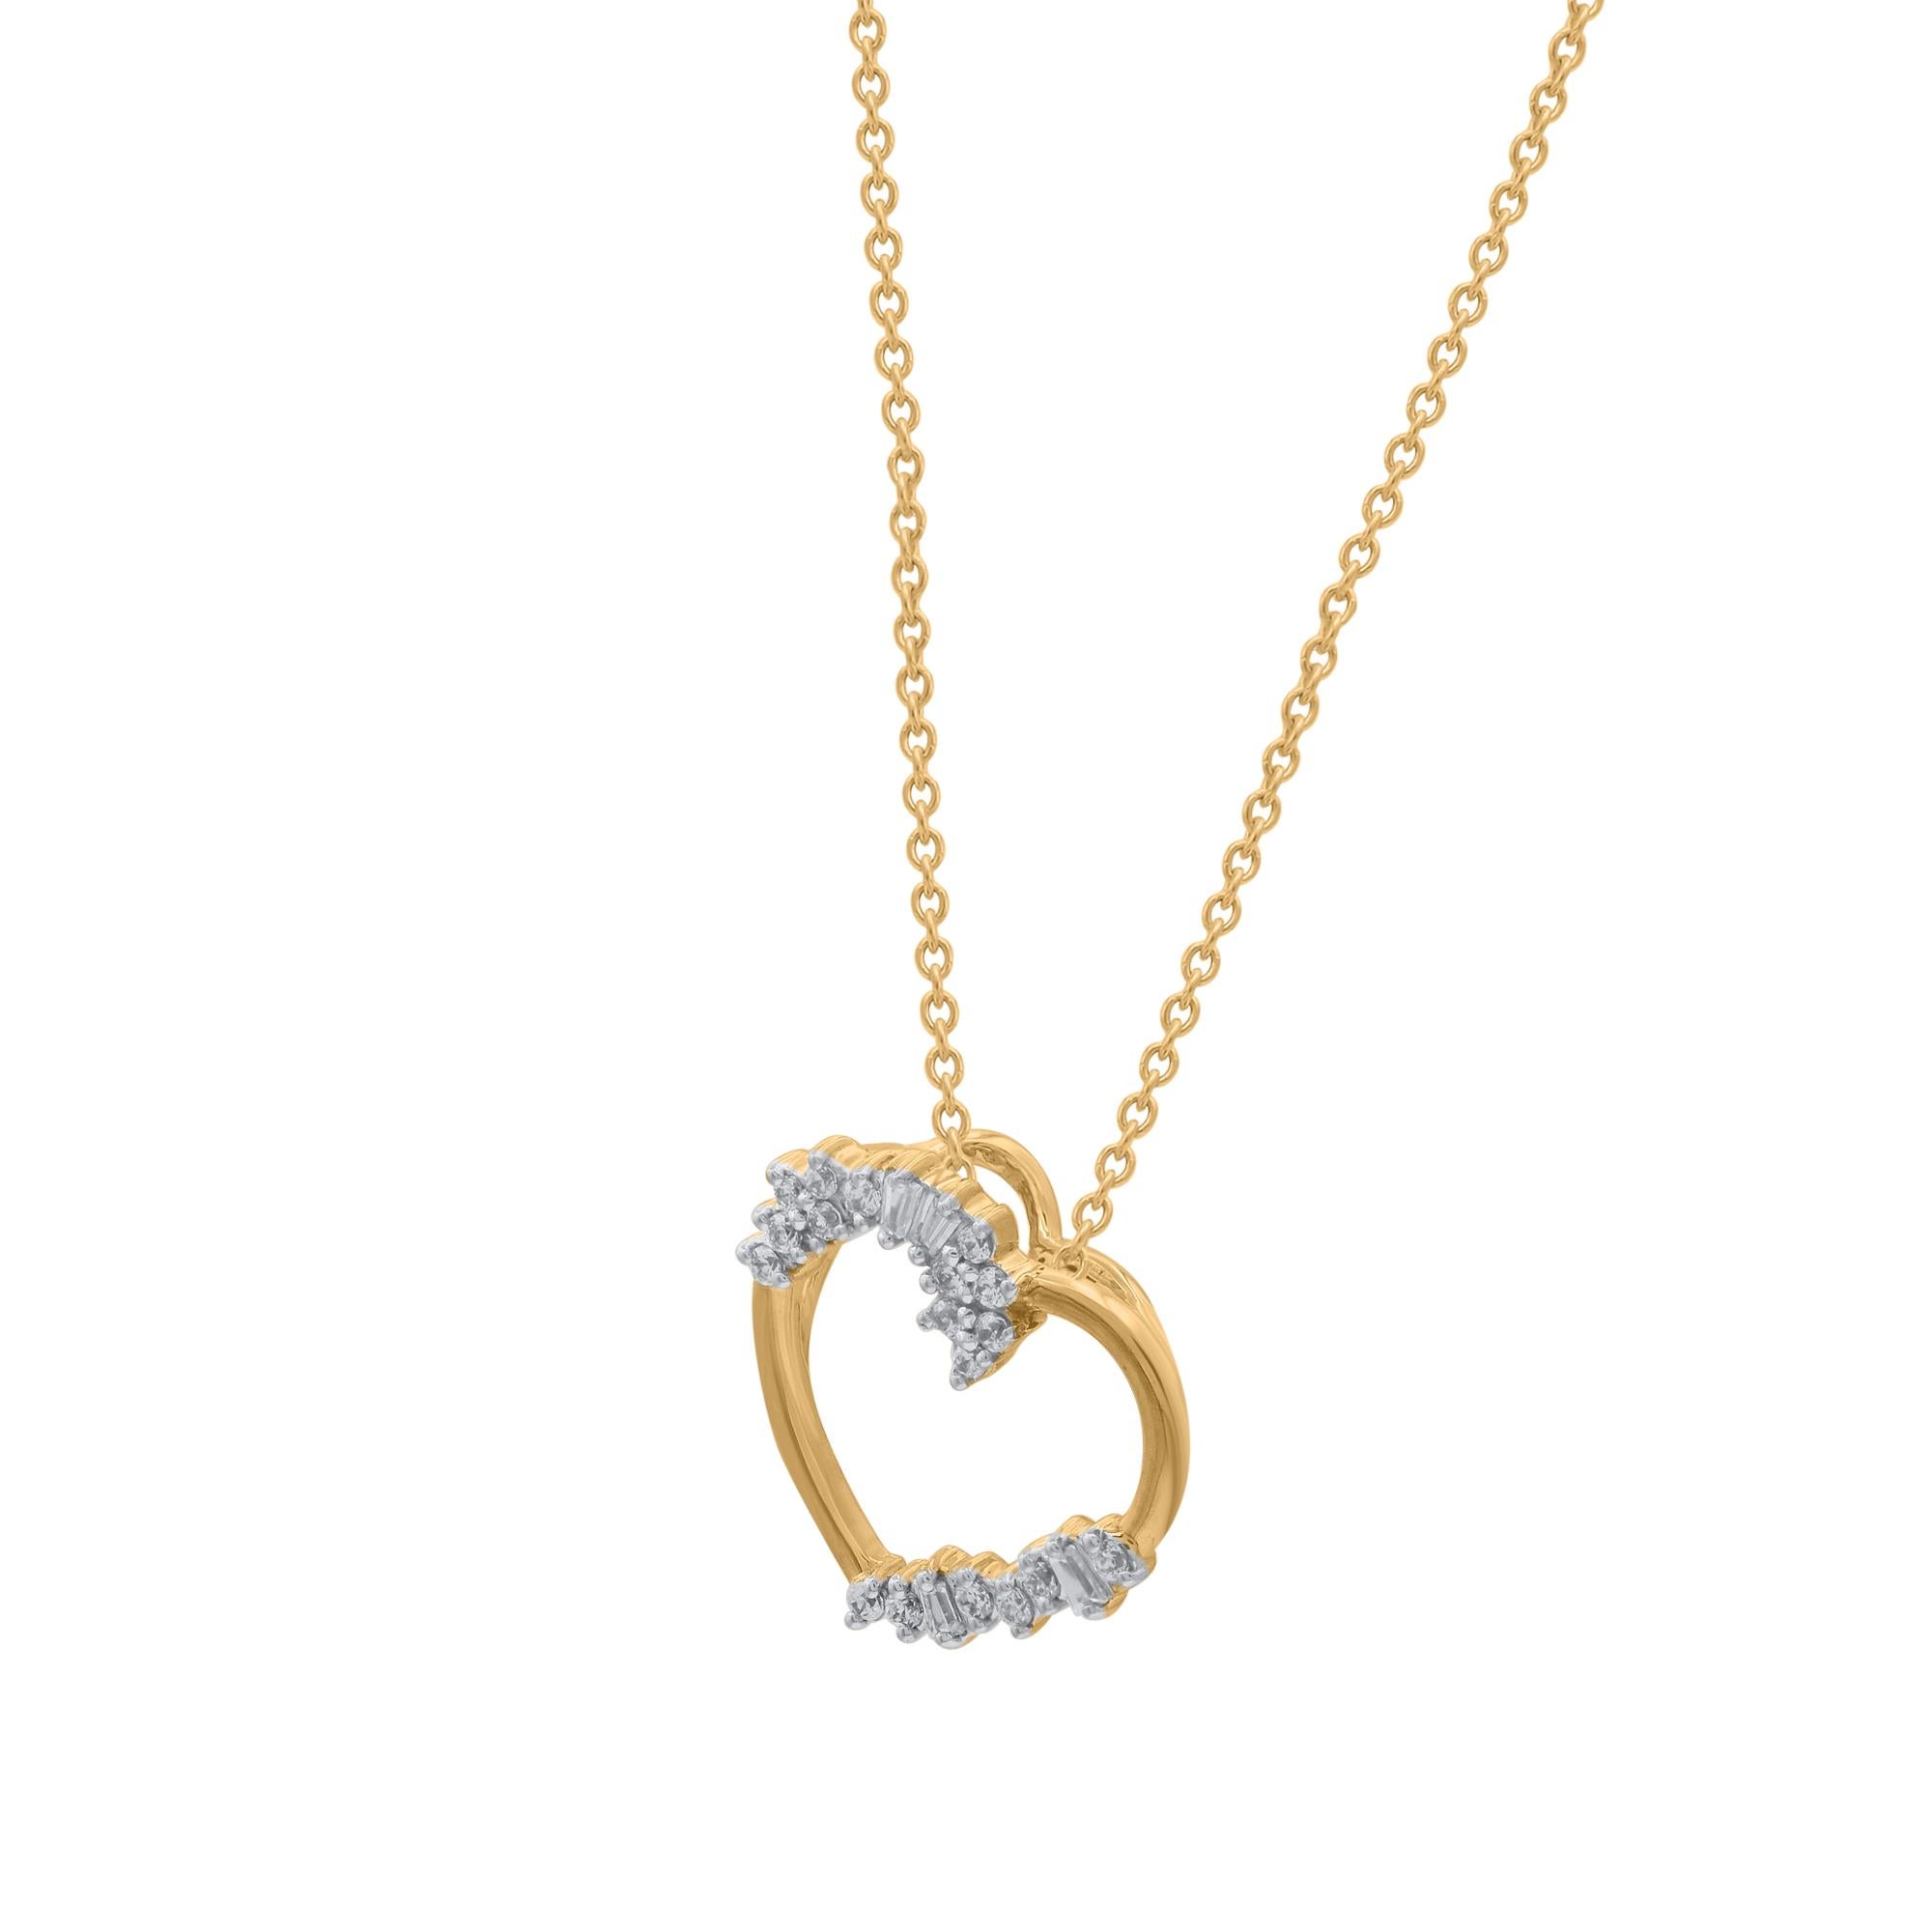 A bright and beautiful symbol of the love you share, this heart pendant is certain to delight. These heart pendant are studded with 23 round and Baguette natural diamonds in prong setting in 18Kt yellow gold Diamonds are graded as H-I color and I-2